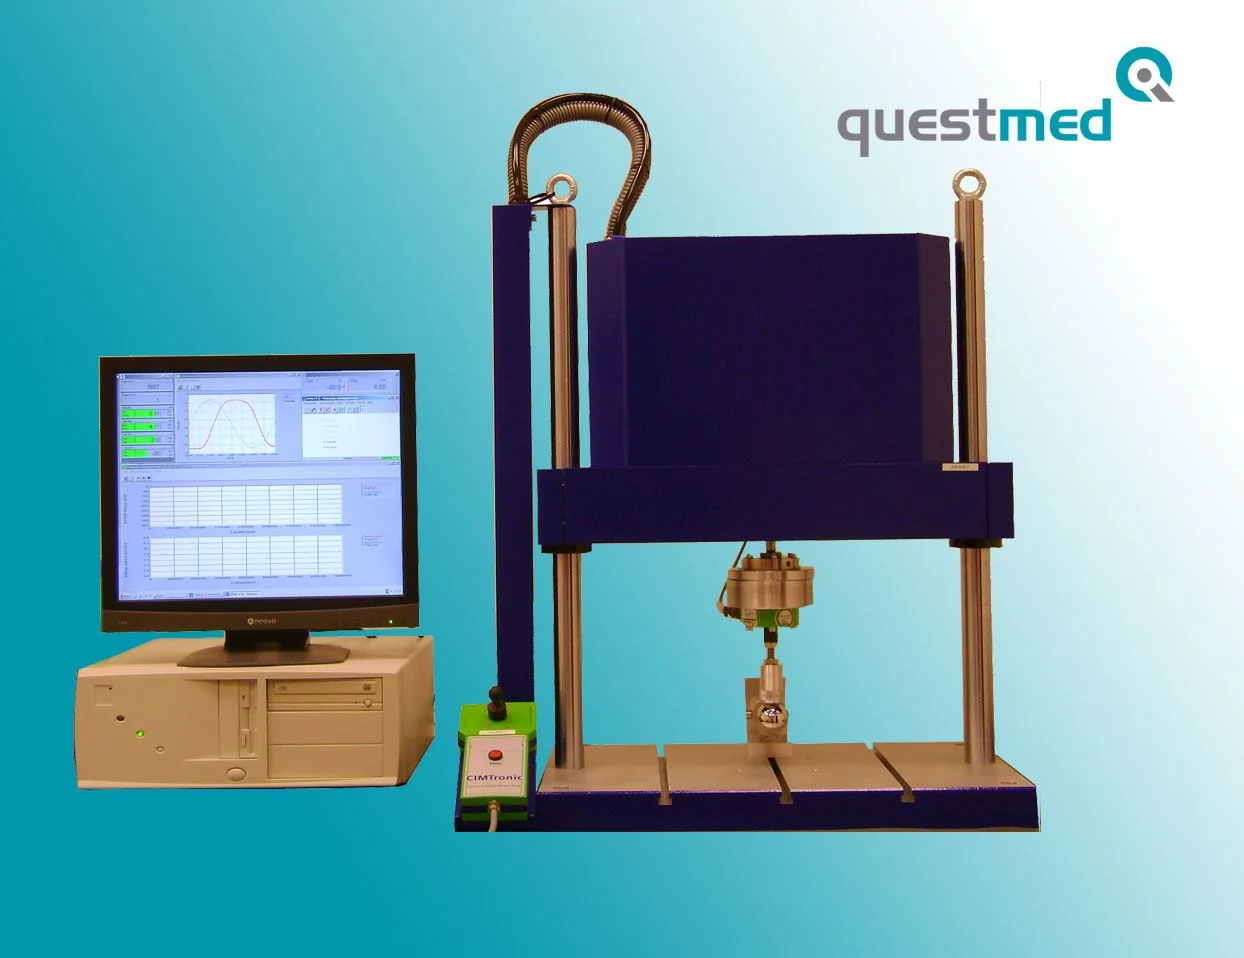 Finger fatigue test system used by Questmed GmbH with peripheral devices.